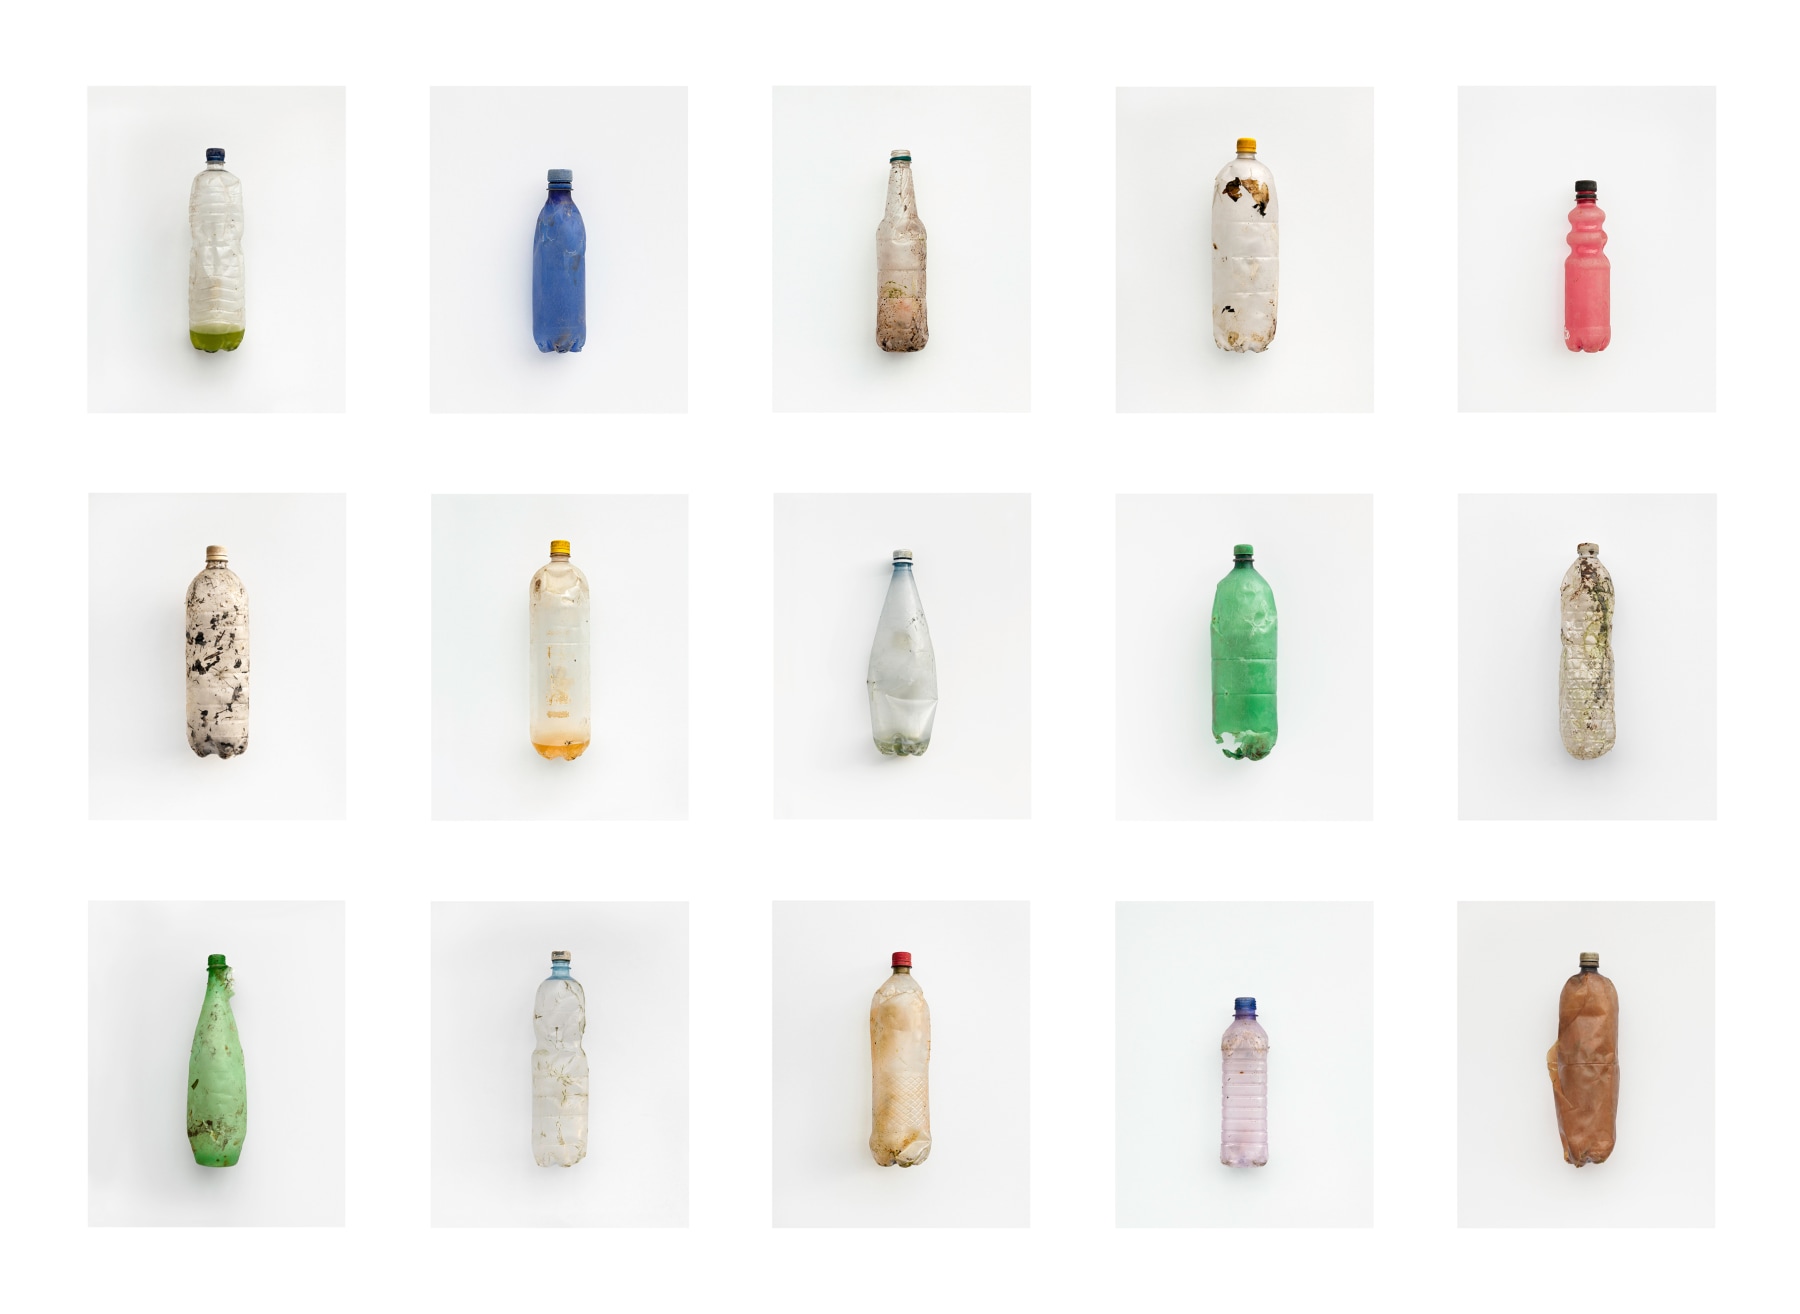 Soft Drinks Bottles Grid, M&ocirc;r Plastig, Wales,&nbsp;2012. Archival pigment prints, 110 x 77 inches overall.